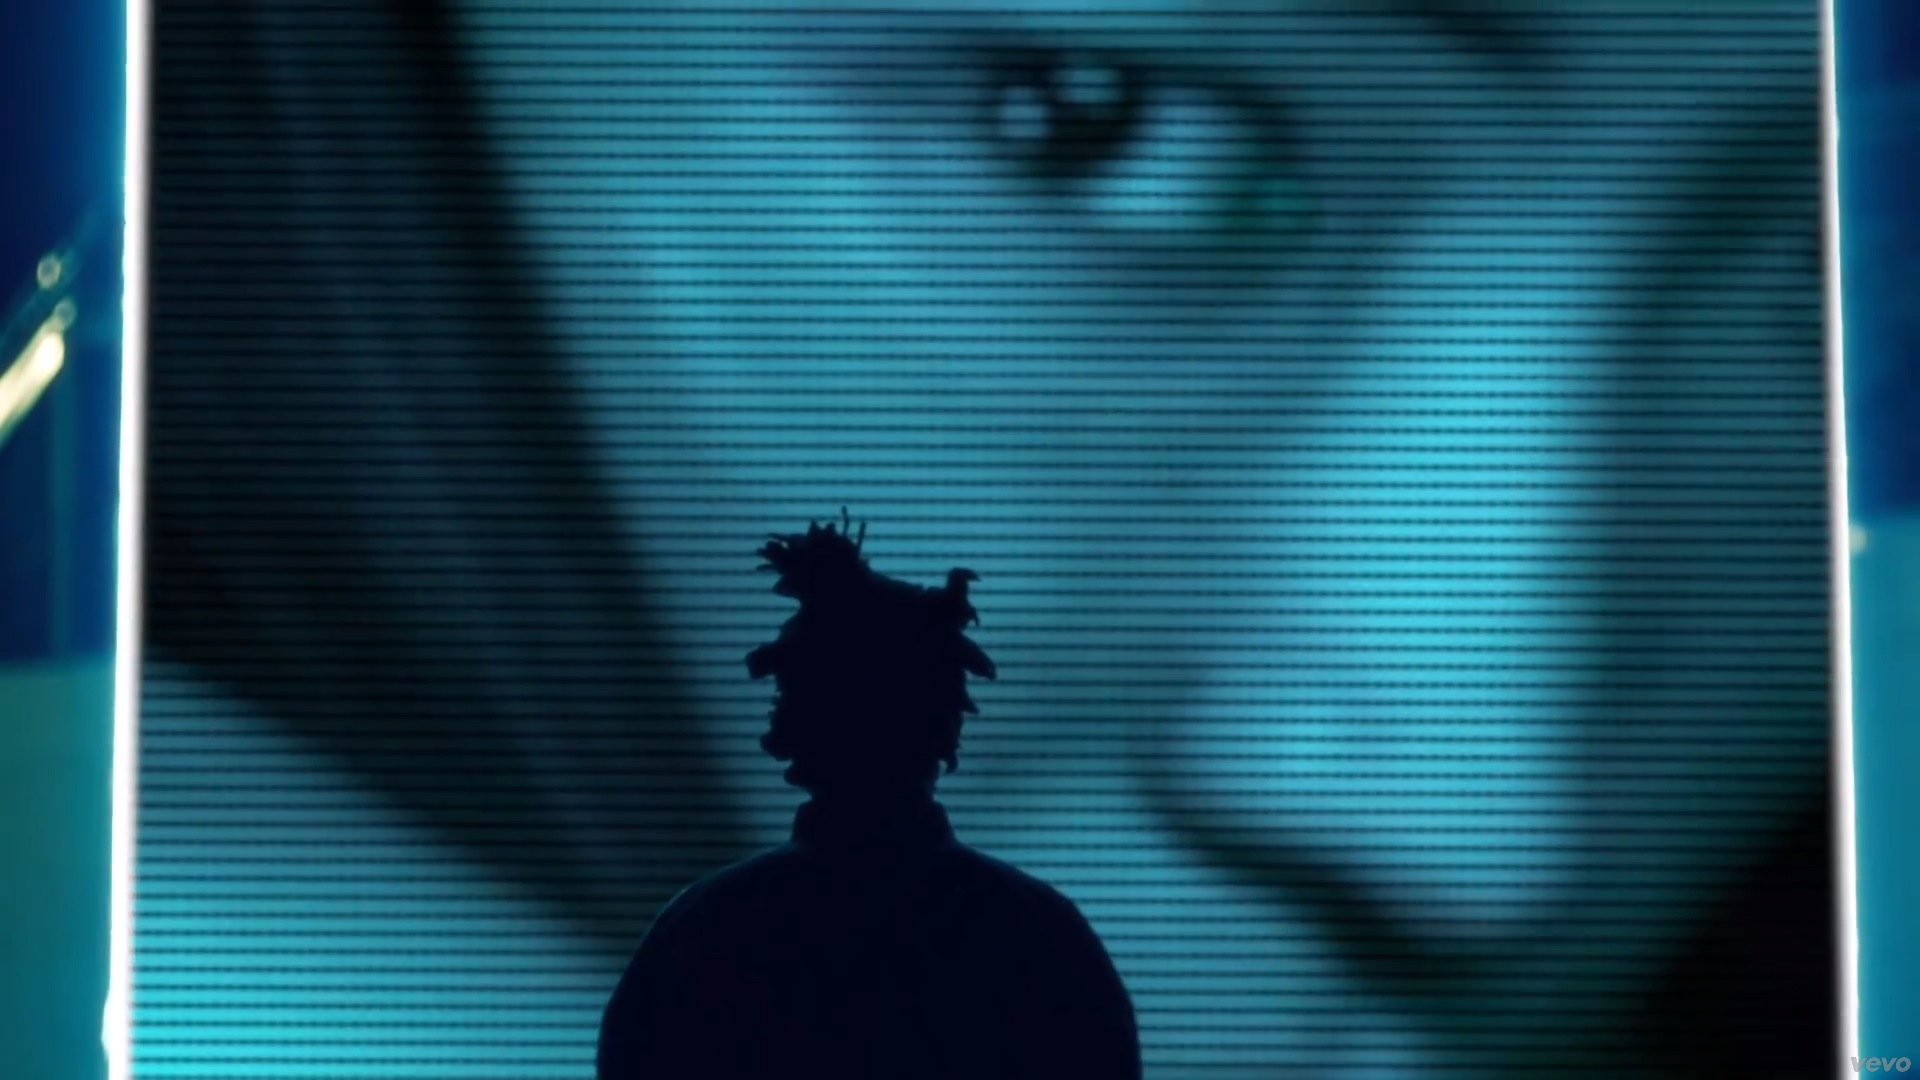 The Weeknd Trilogy Wallpapers  Wallpaper Cave